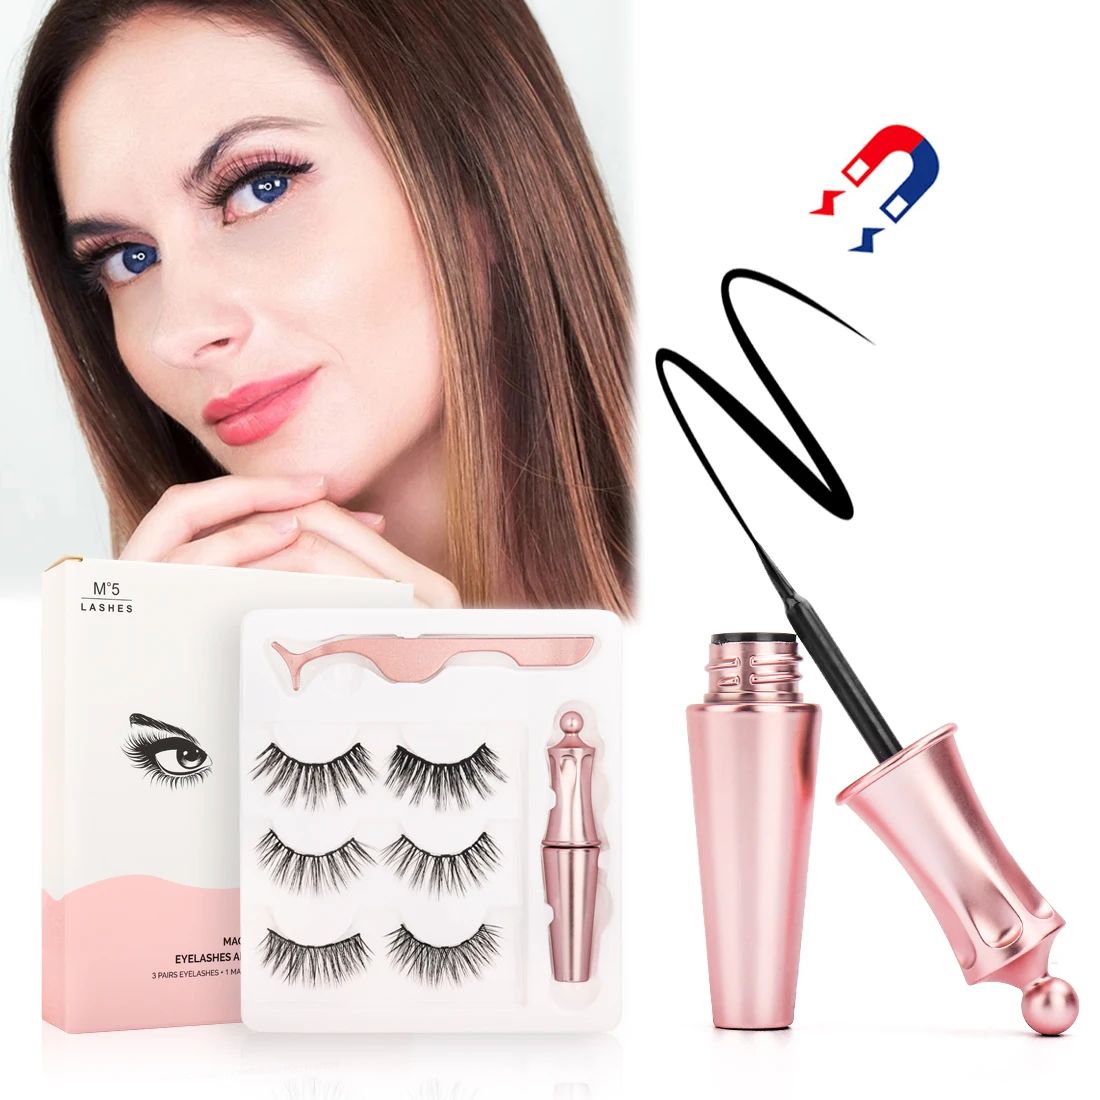 New Magnetic eyelashes with 4 magnets magnetic lashes natural false eyelashes magnet lashes with eyelashes applicator-24P